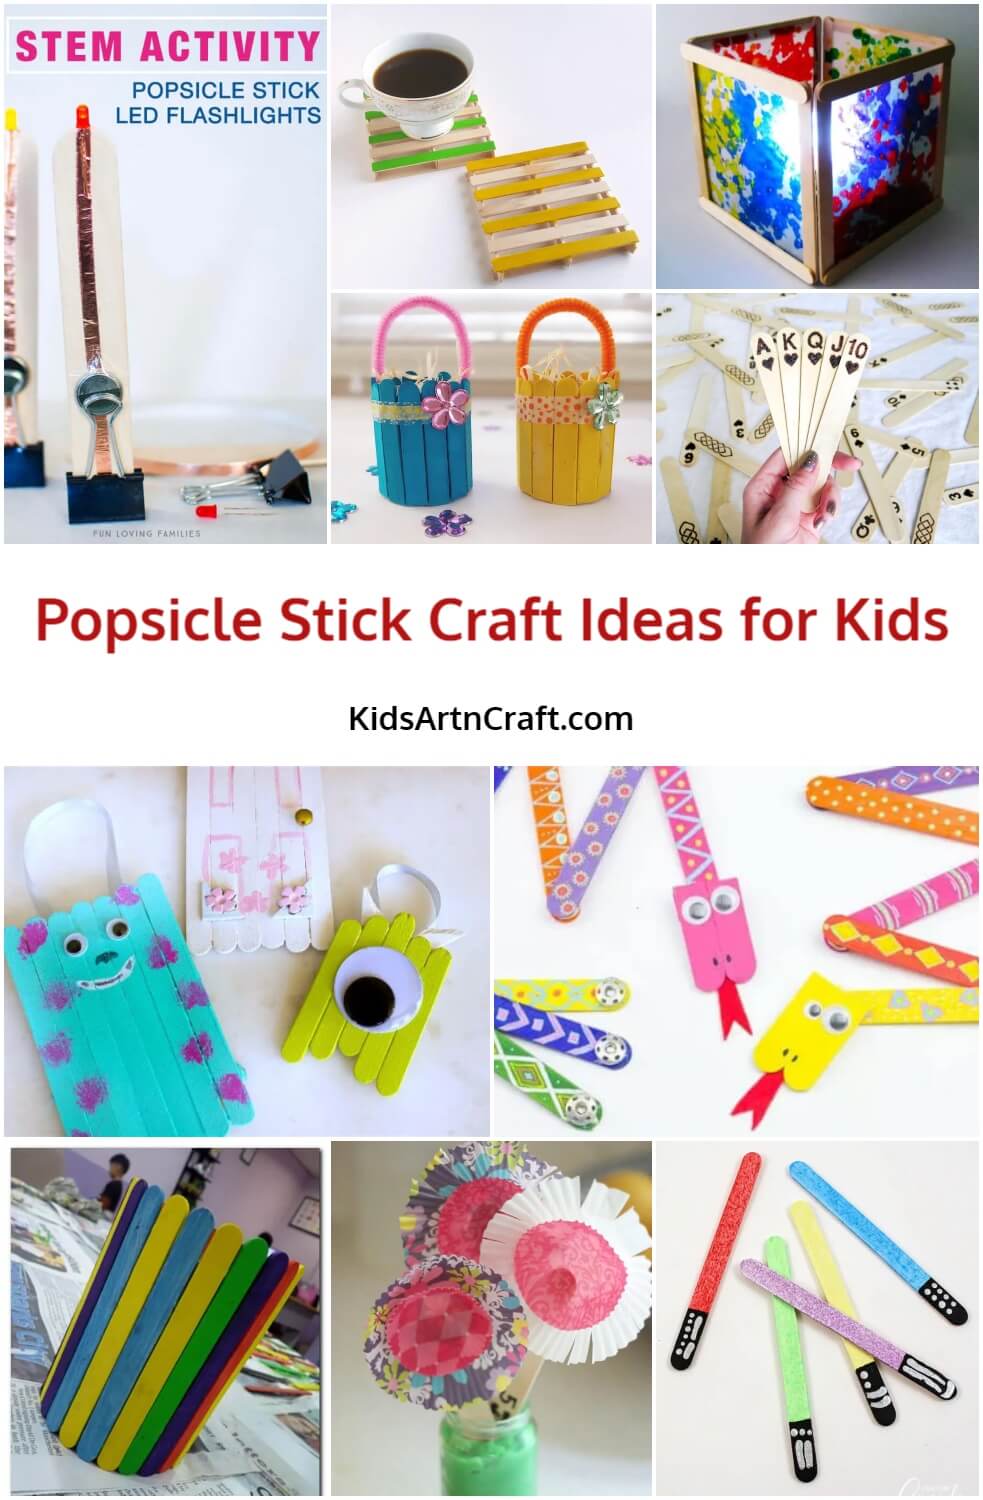  Popsicle Stick Craft Ideas for Kids